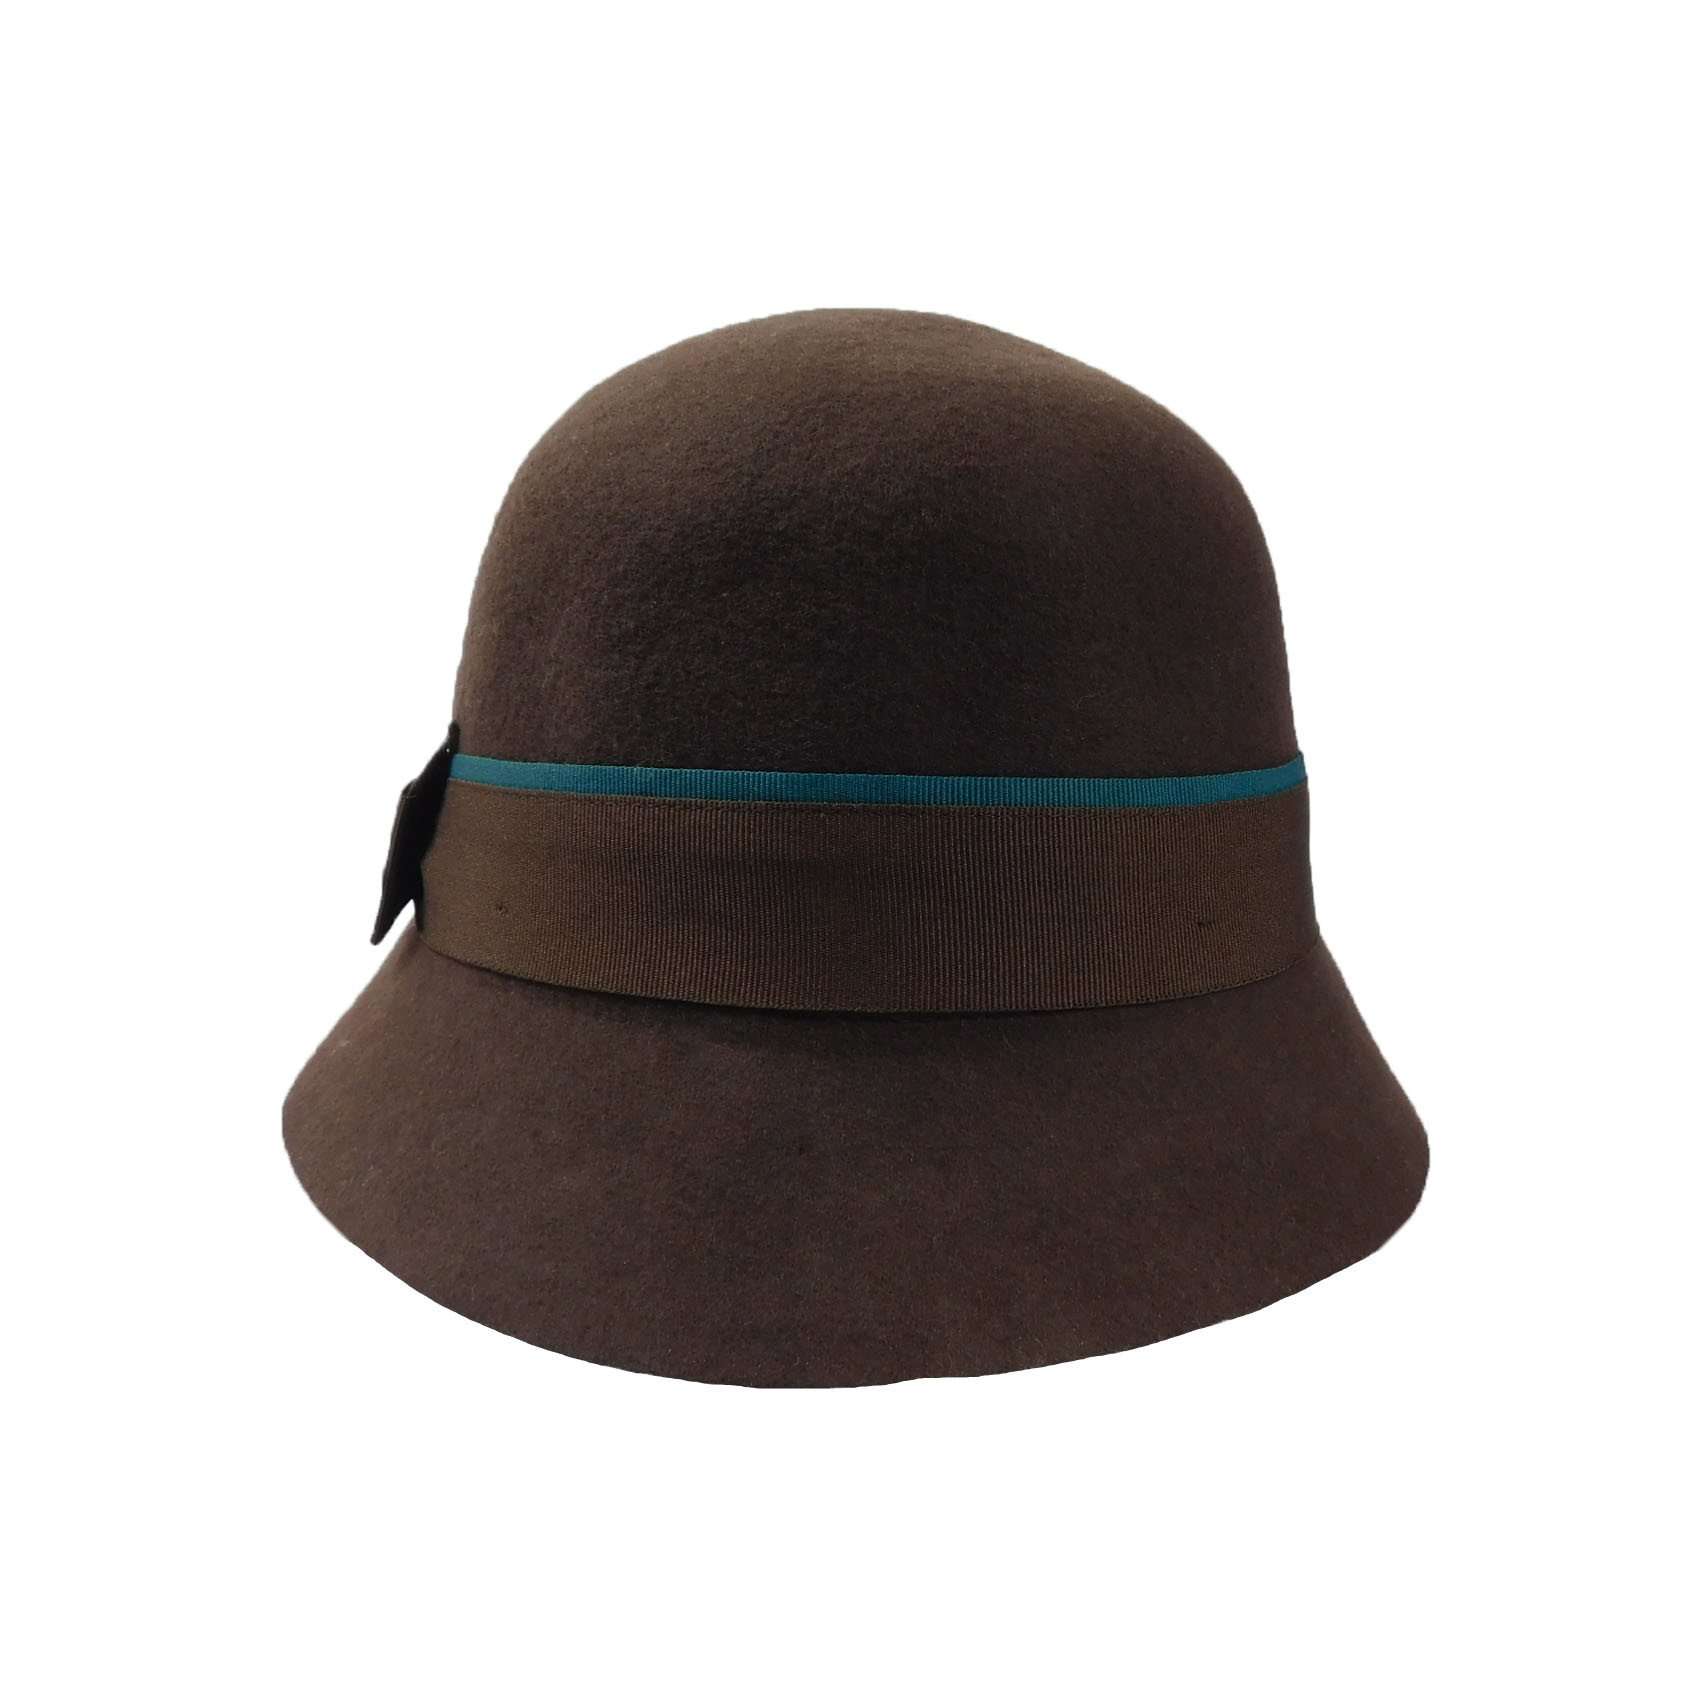 Wool Felt Cloche with Two-Tone Band Cloche Jeanne Simmons    